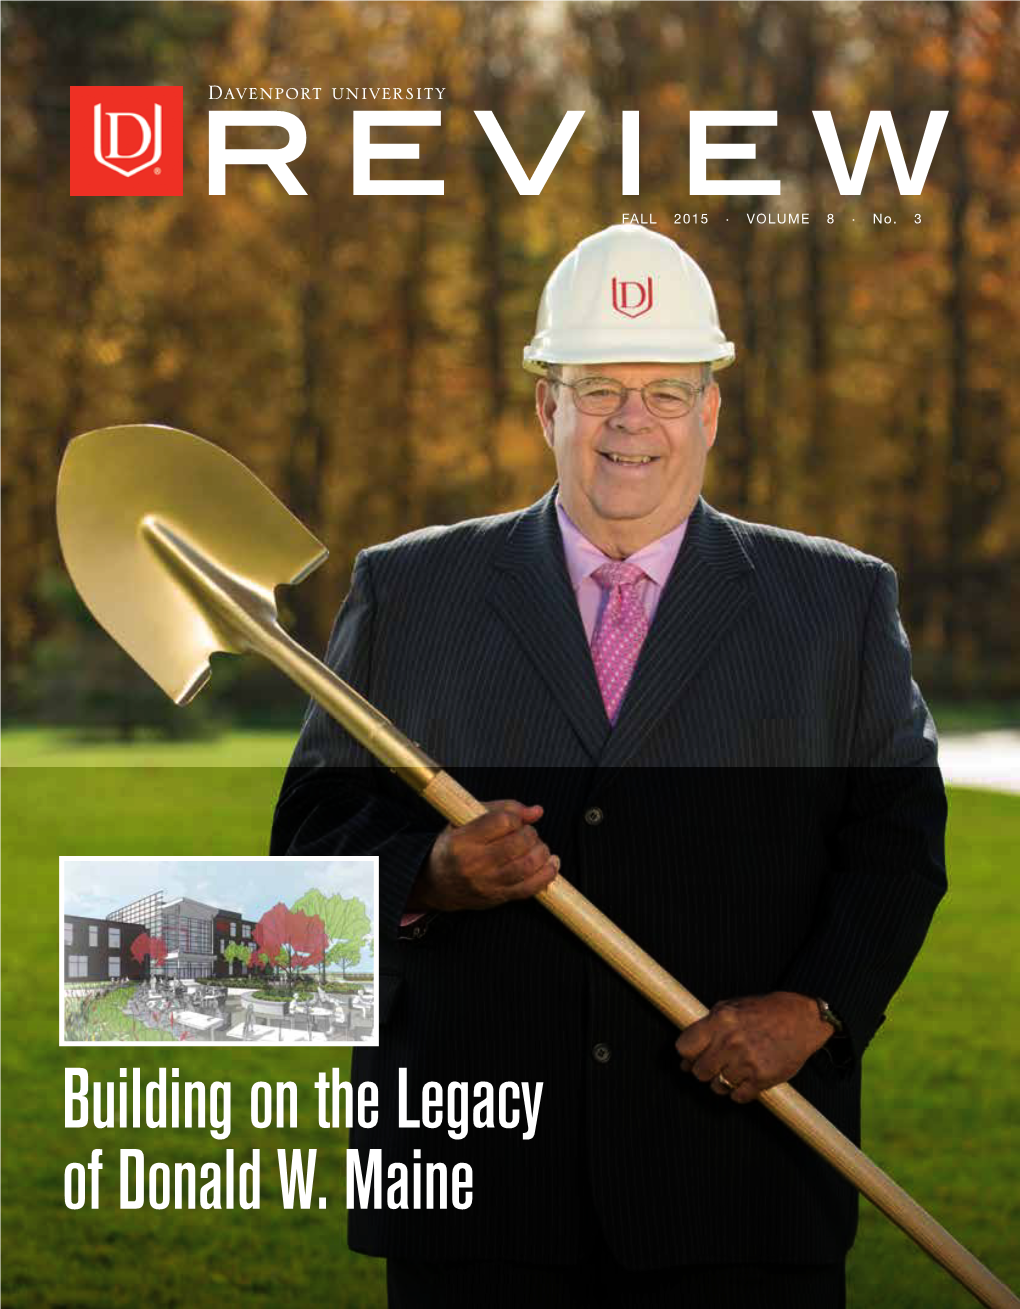 Building on the Legacy of Donald W. Maine